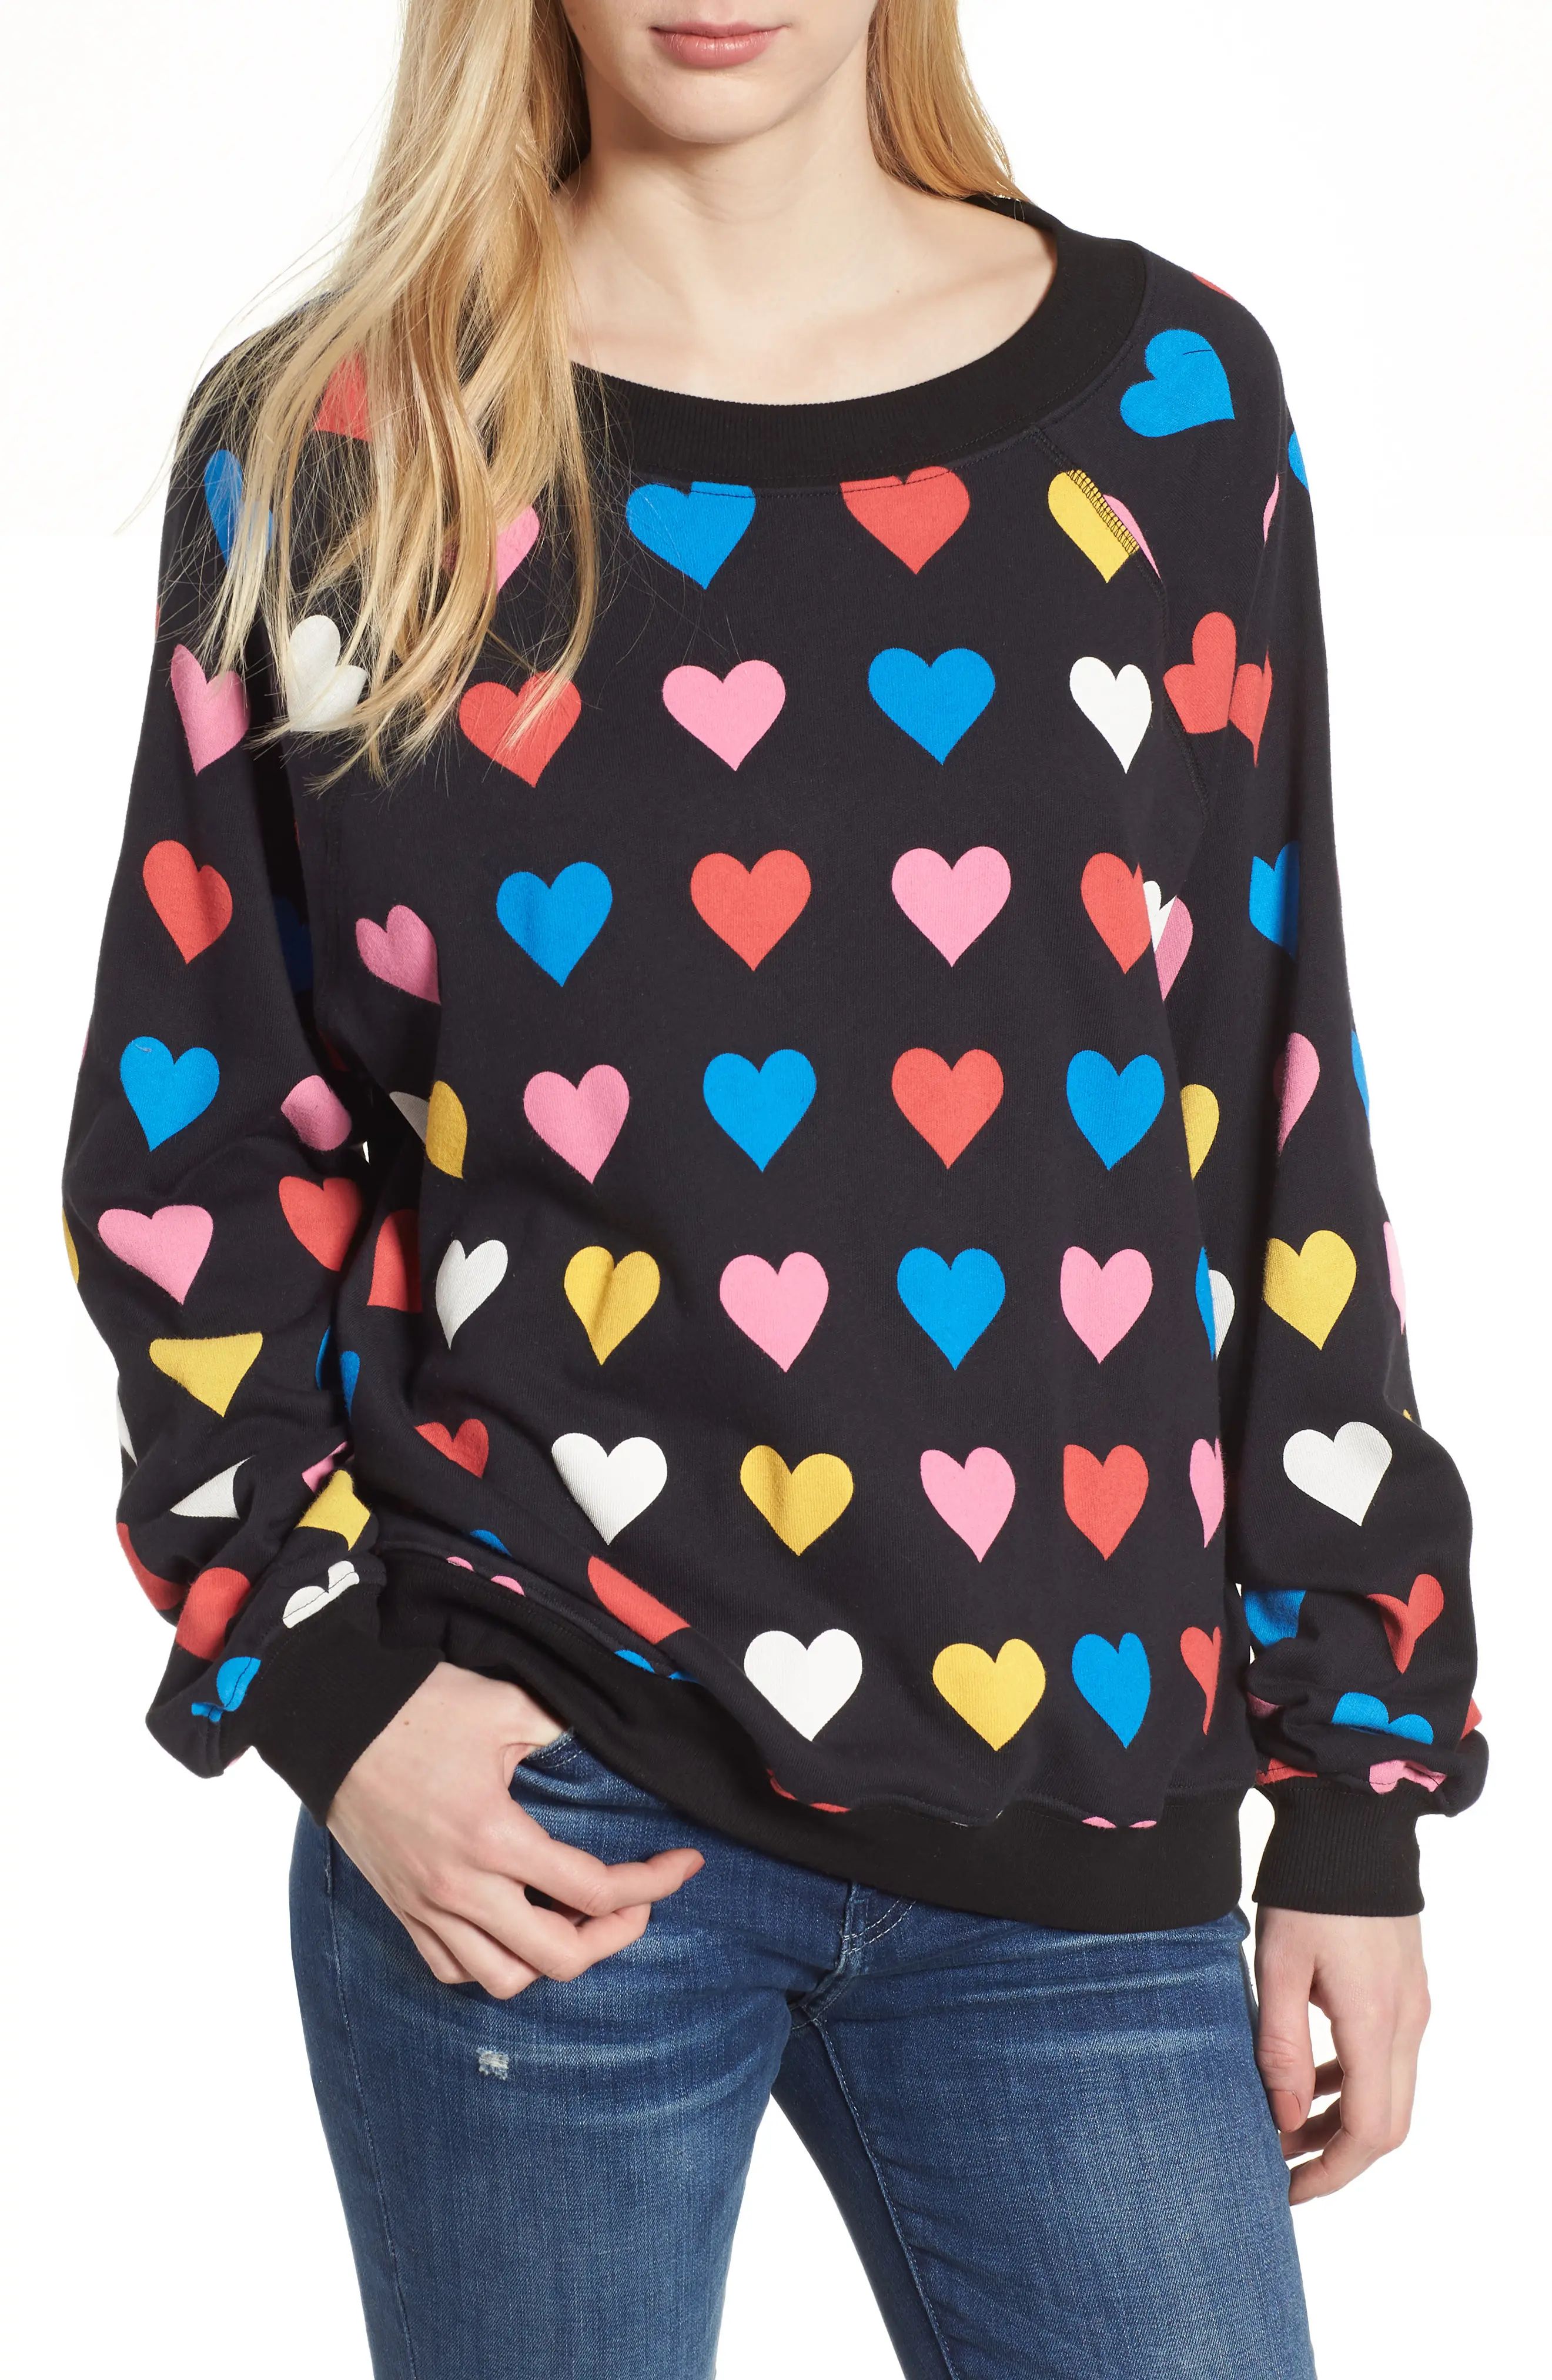 Have a Heart Sommers Sweatshirt | Nordstrom